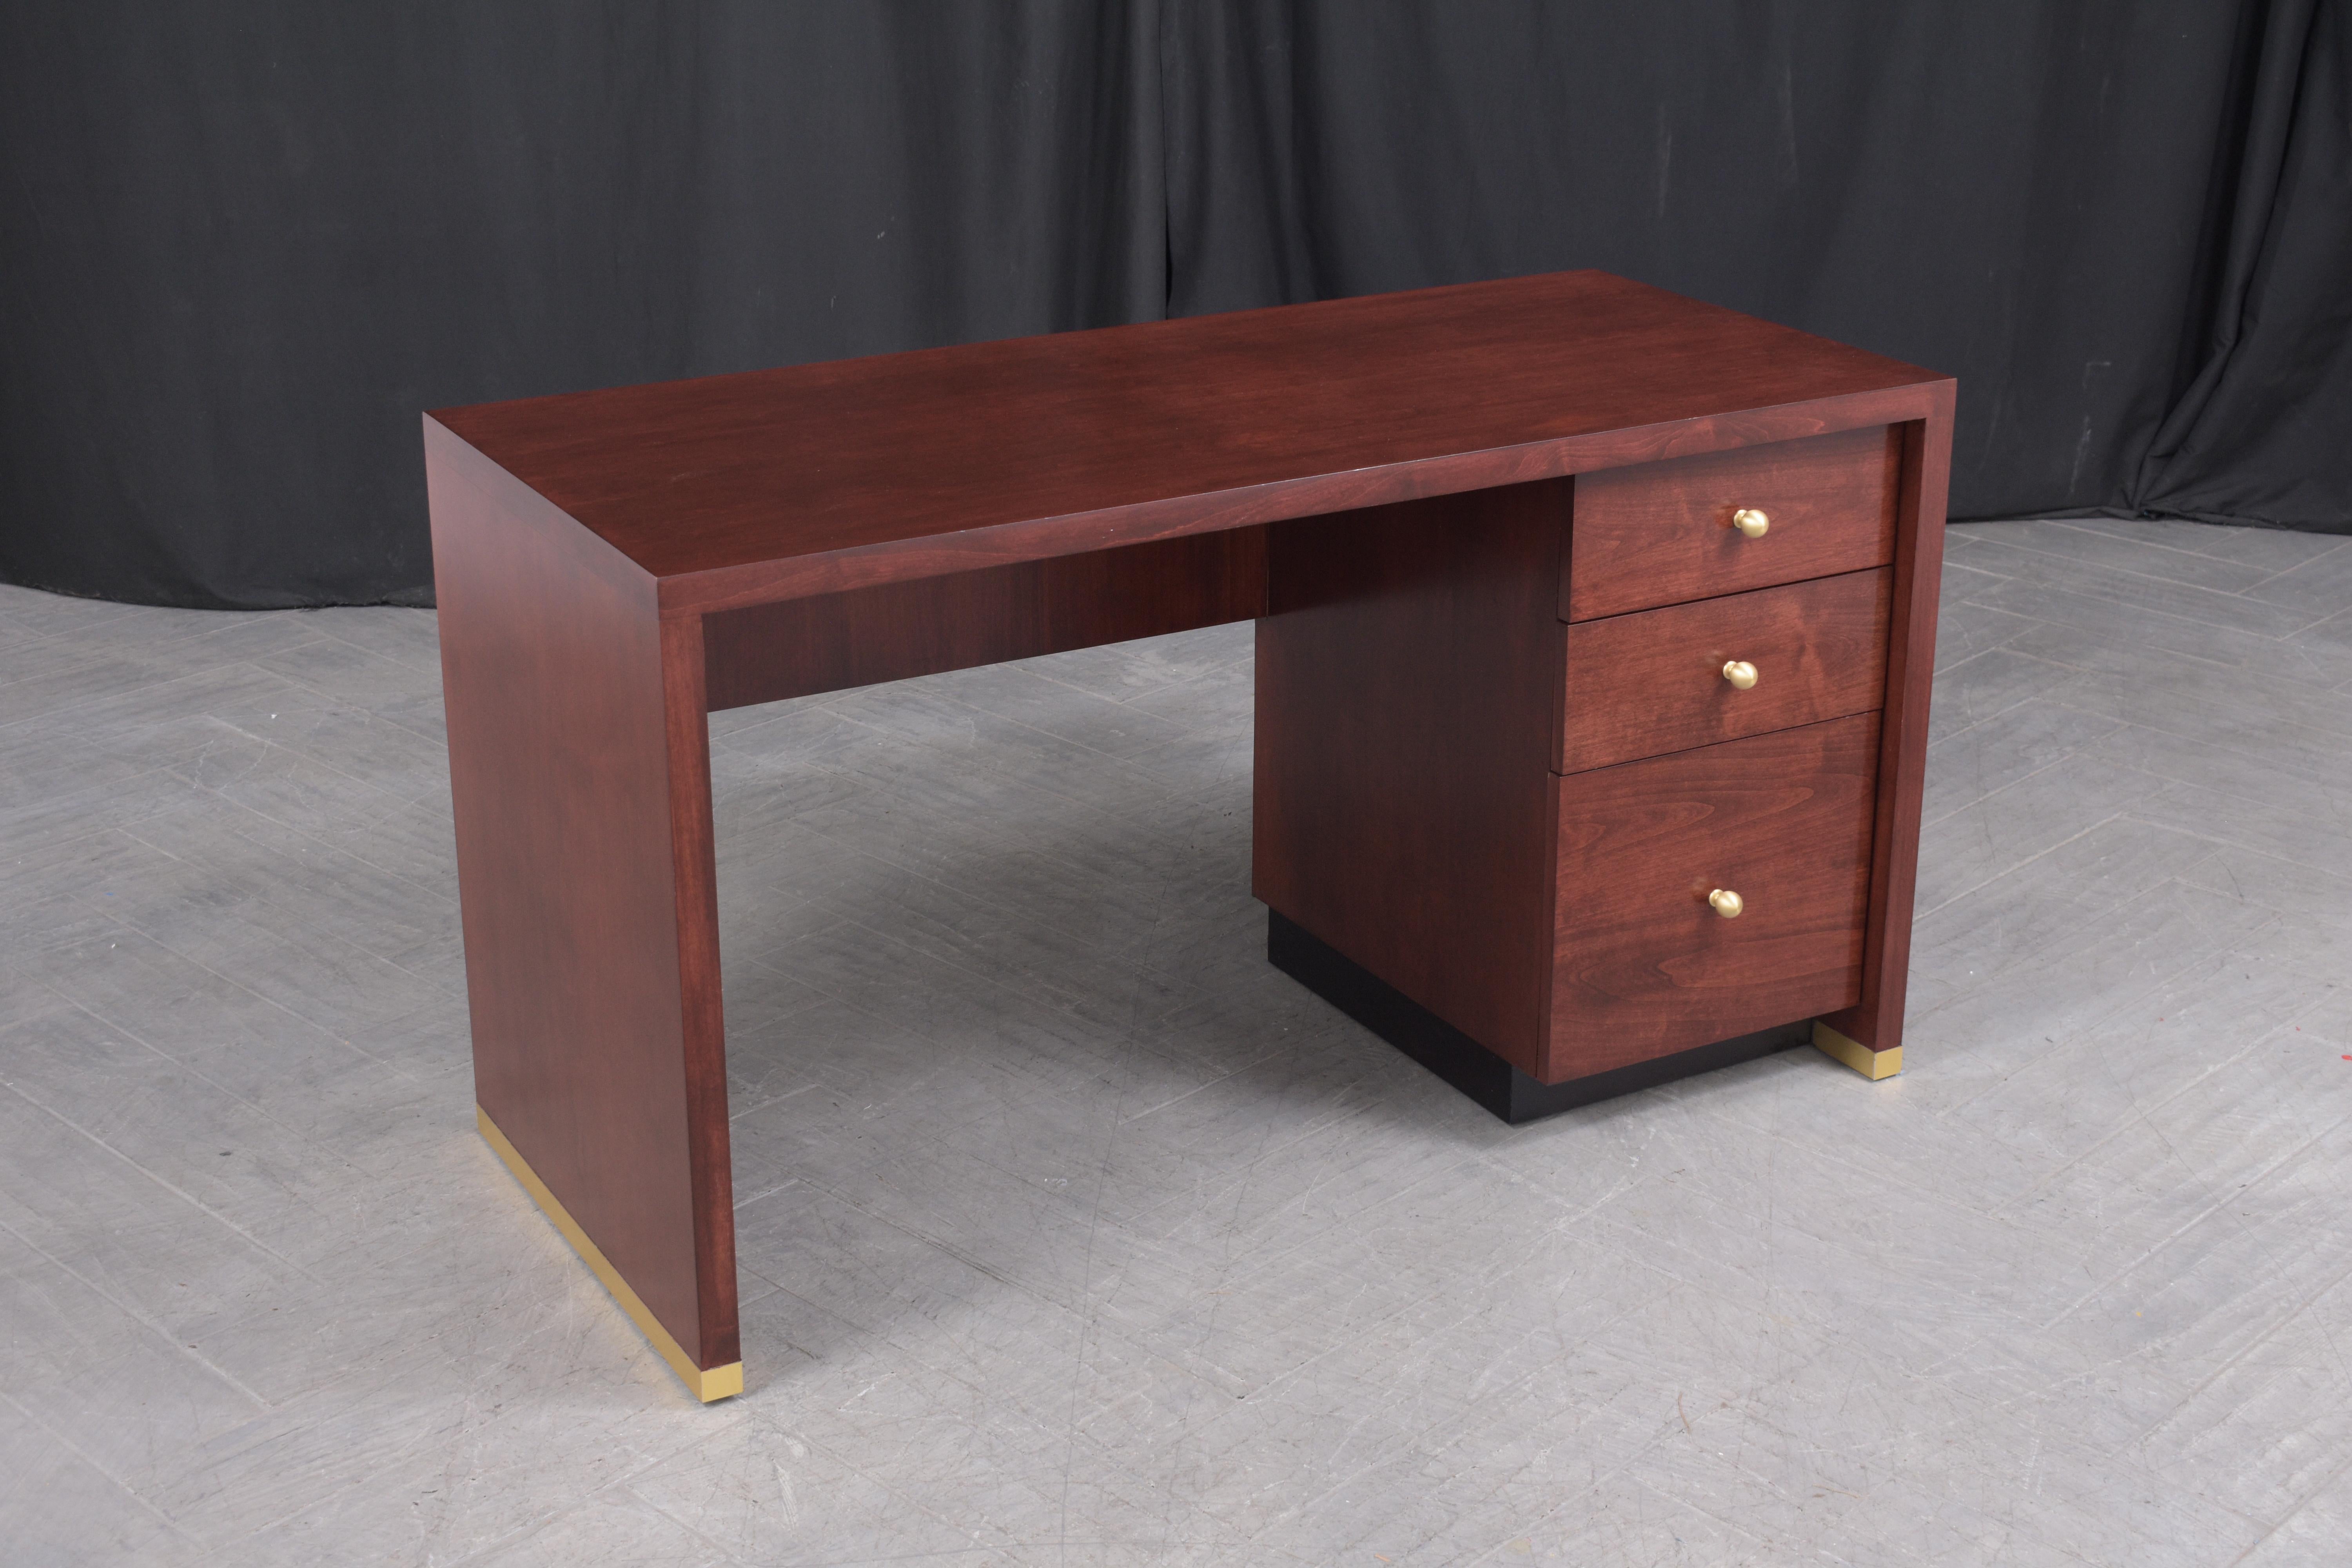 Hand-Crafted 1970s Vintage Mid-Century Modern Mahogany Desk: Timeless Elegance & Quality For Sale